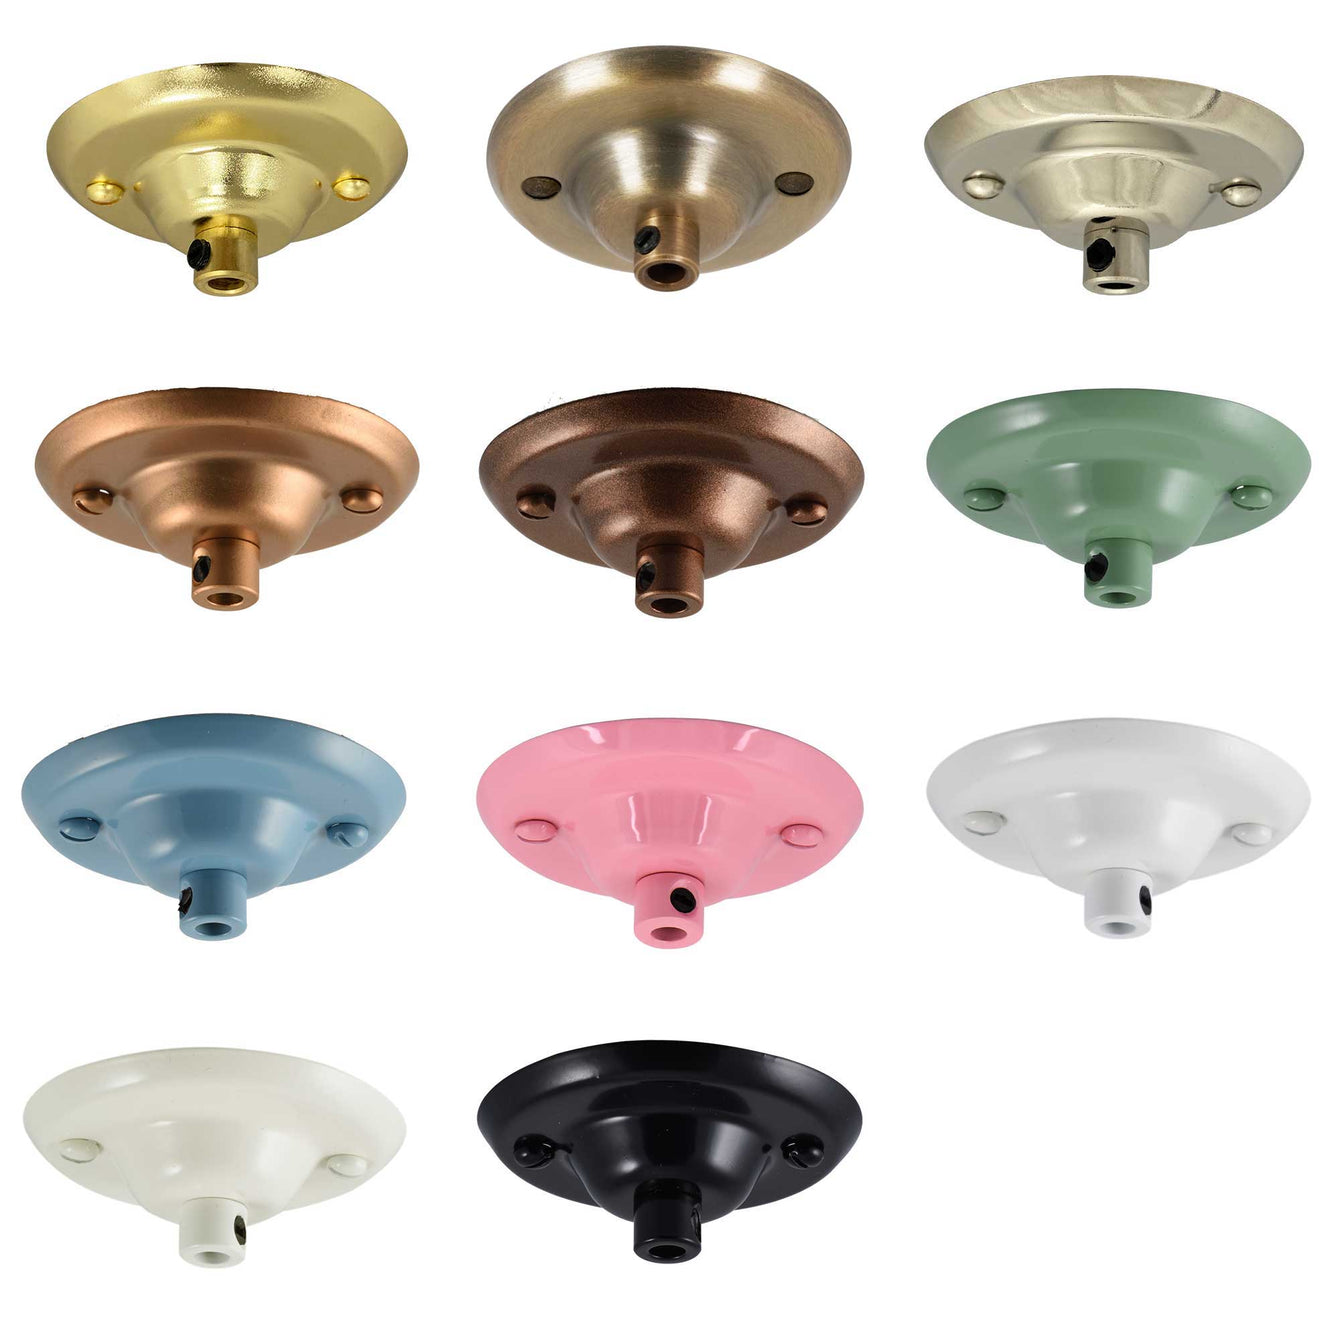 ElekTek 75mm Diameter Ceiling Plate with Cord Grip Metallic Finishes Powder Coated Colours Brass